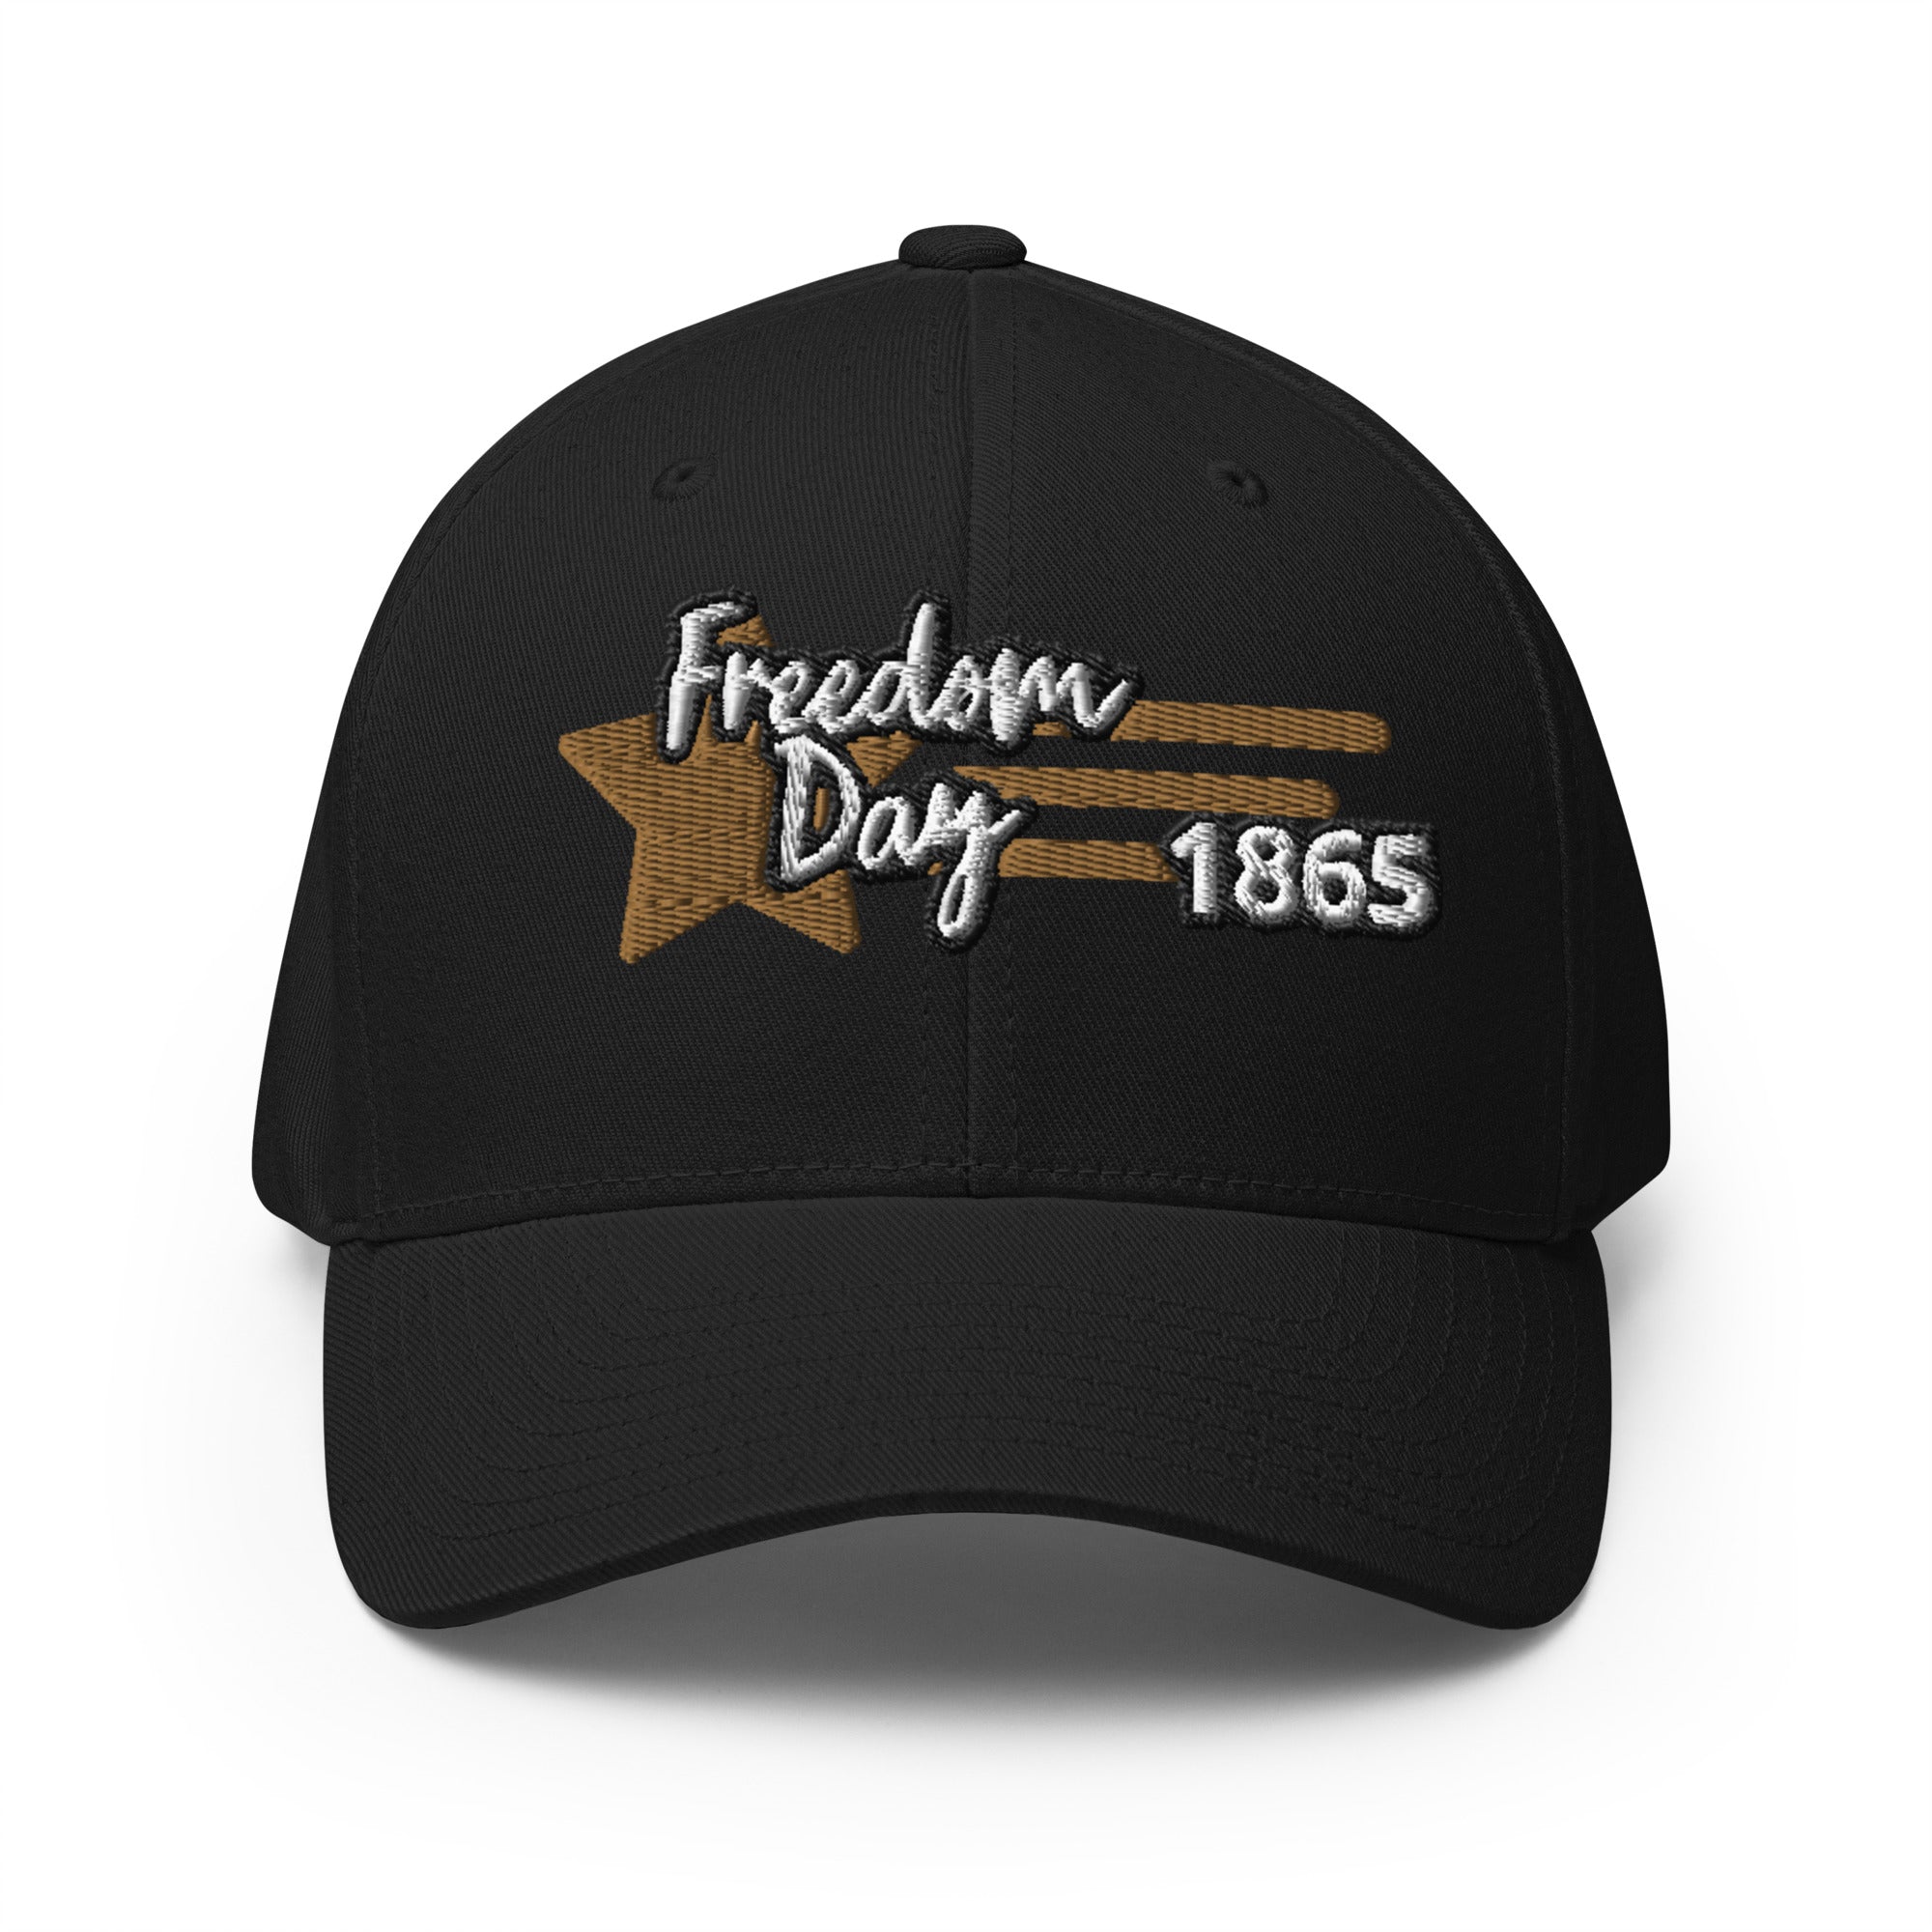 Gold Star Freedom Day Structured Twill Cap